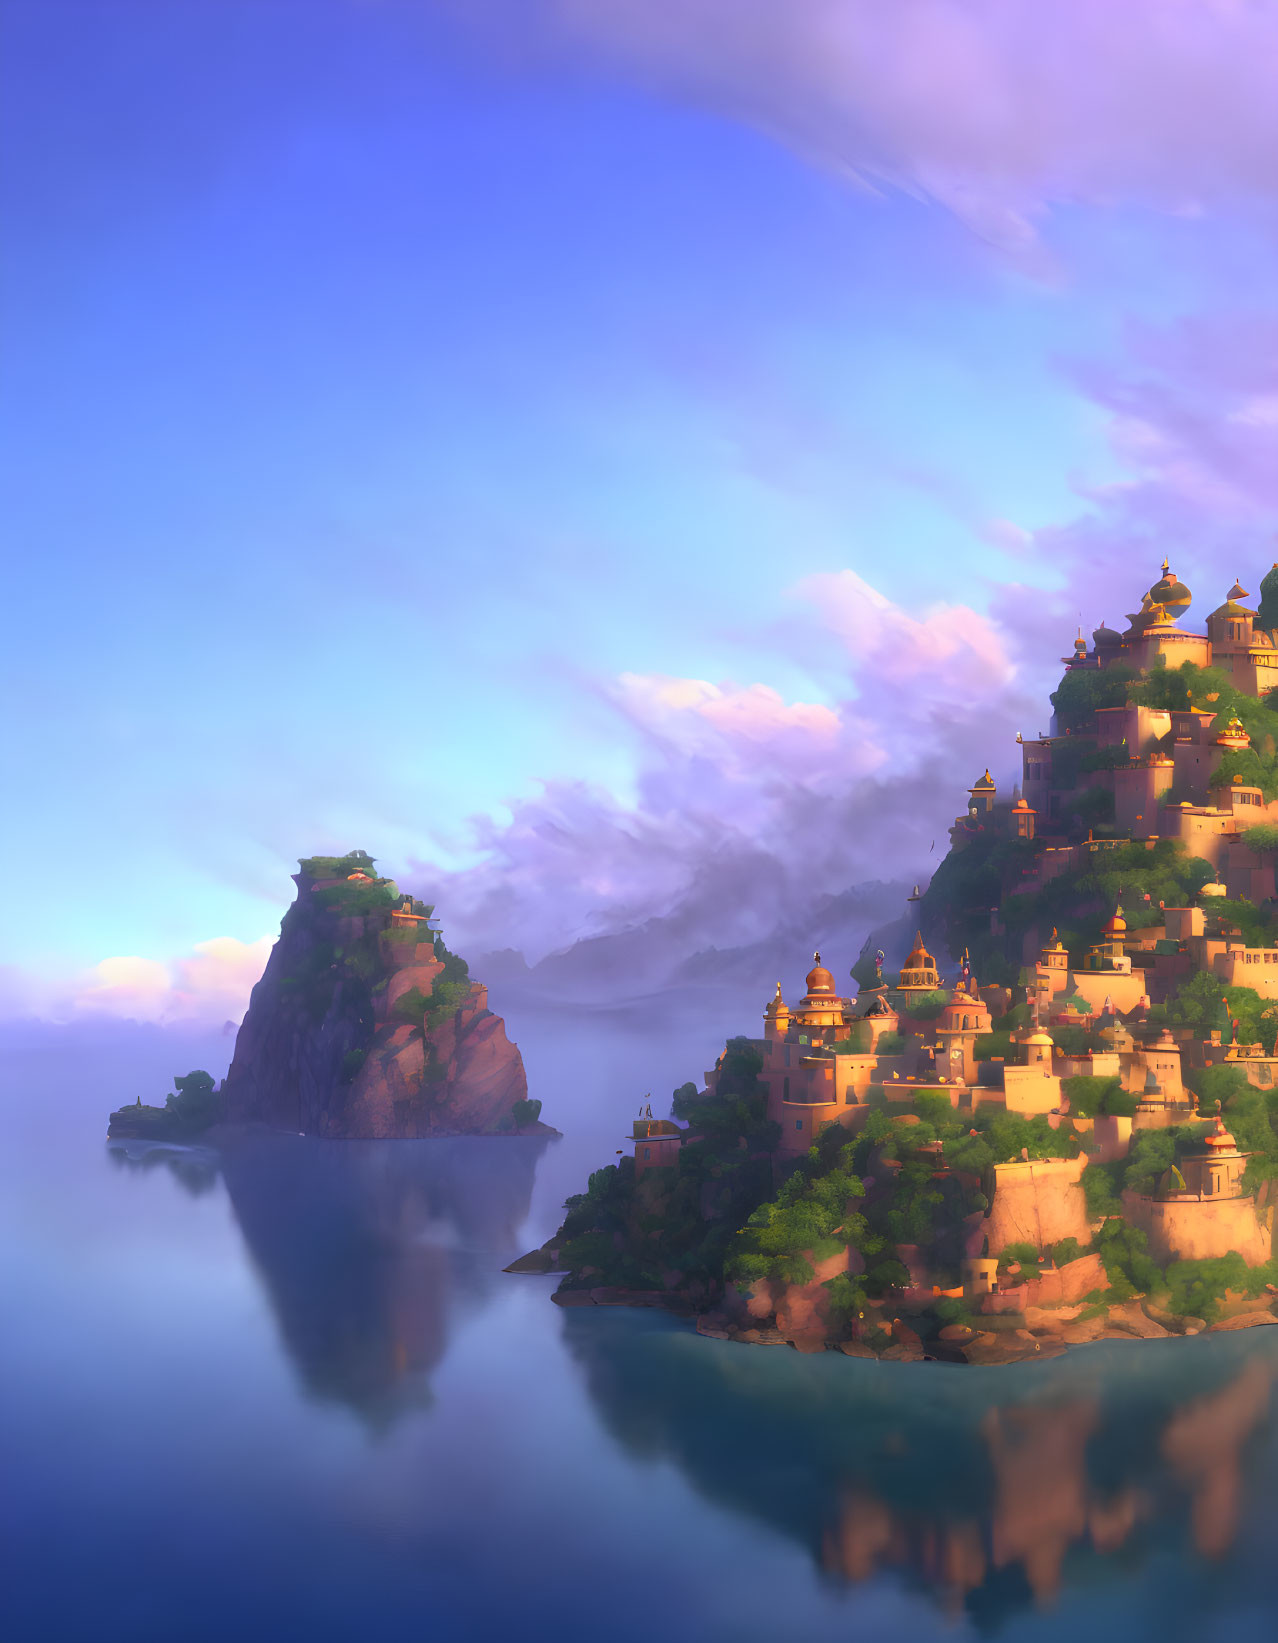 Vibrant cliffside city at sunset with mist-covered rocks and tranquil water.